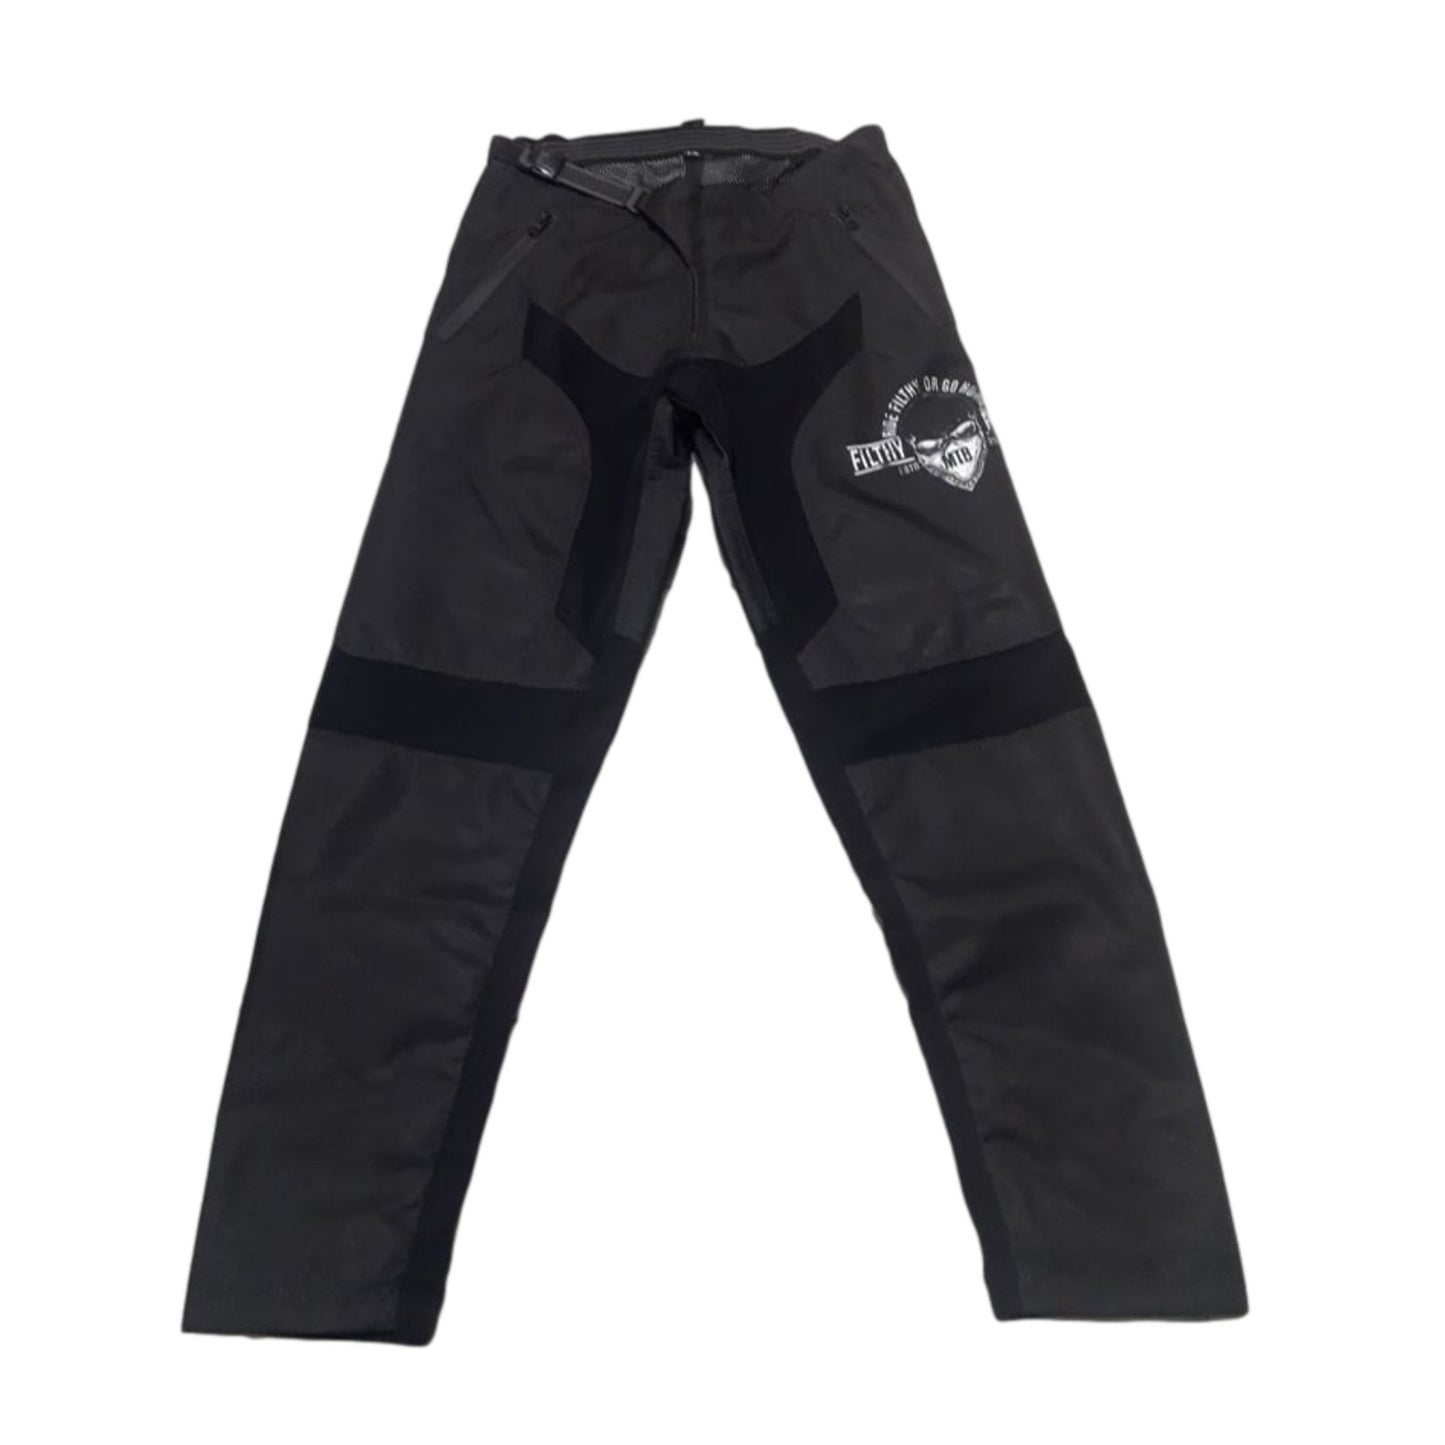 Ride Filthy or go Home Shorts & Trousers (PRE-ORDER)